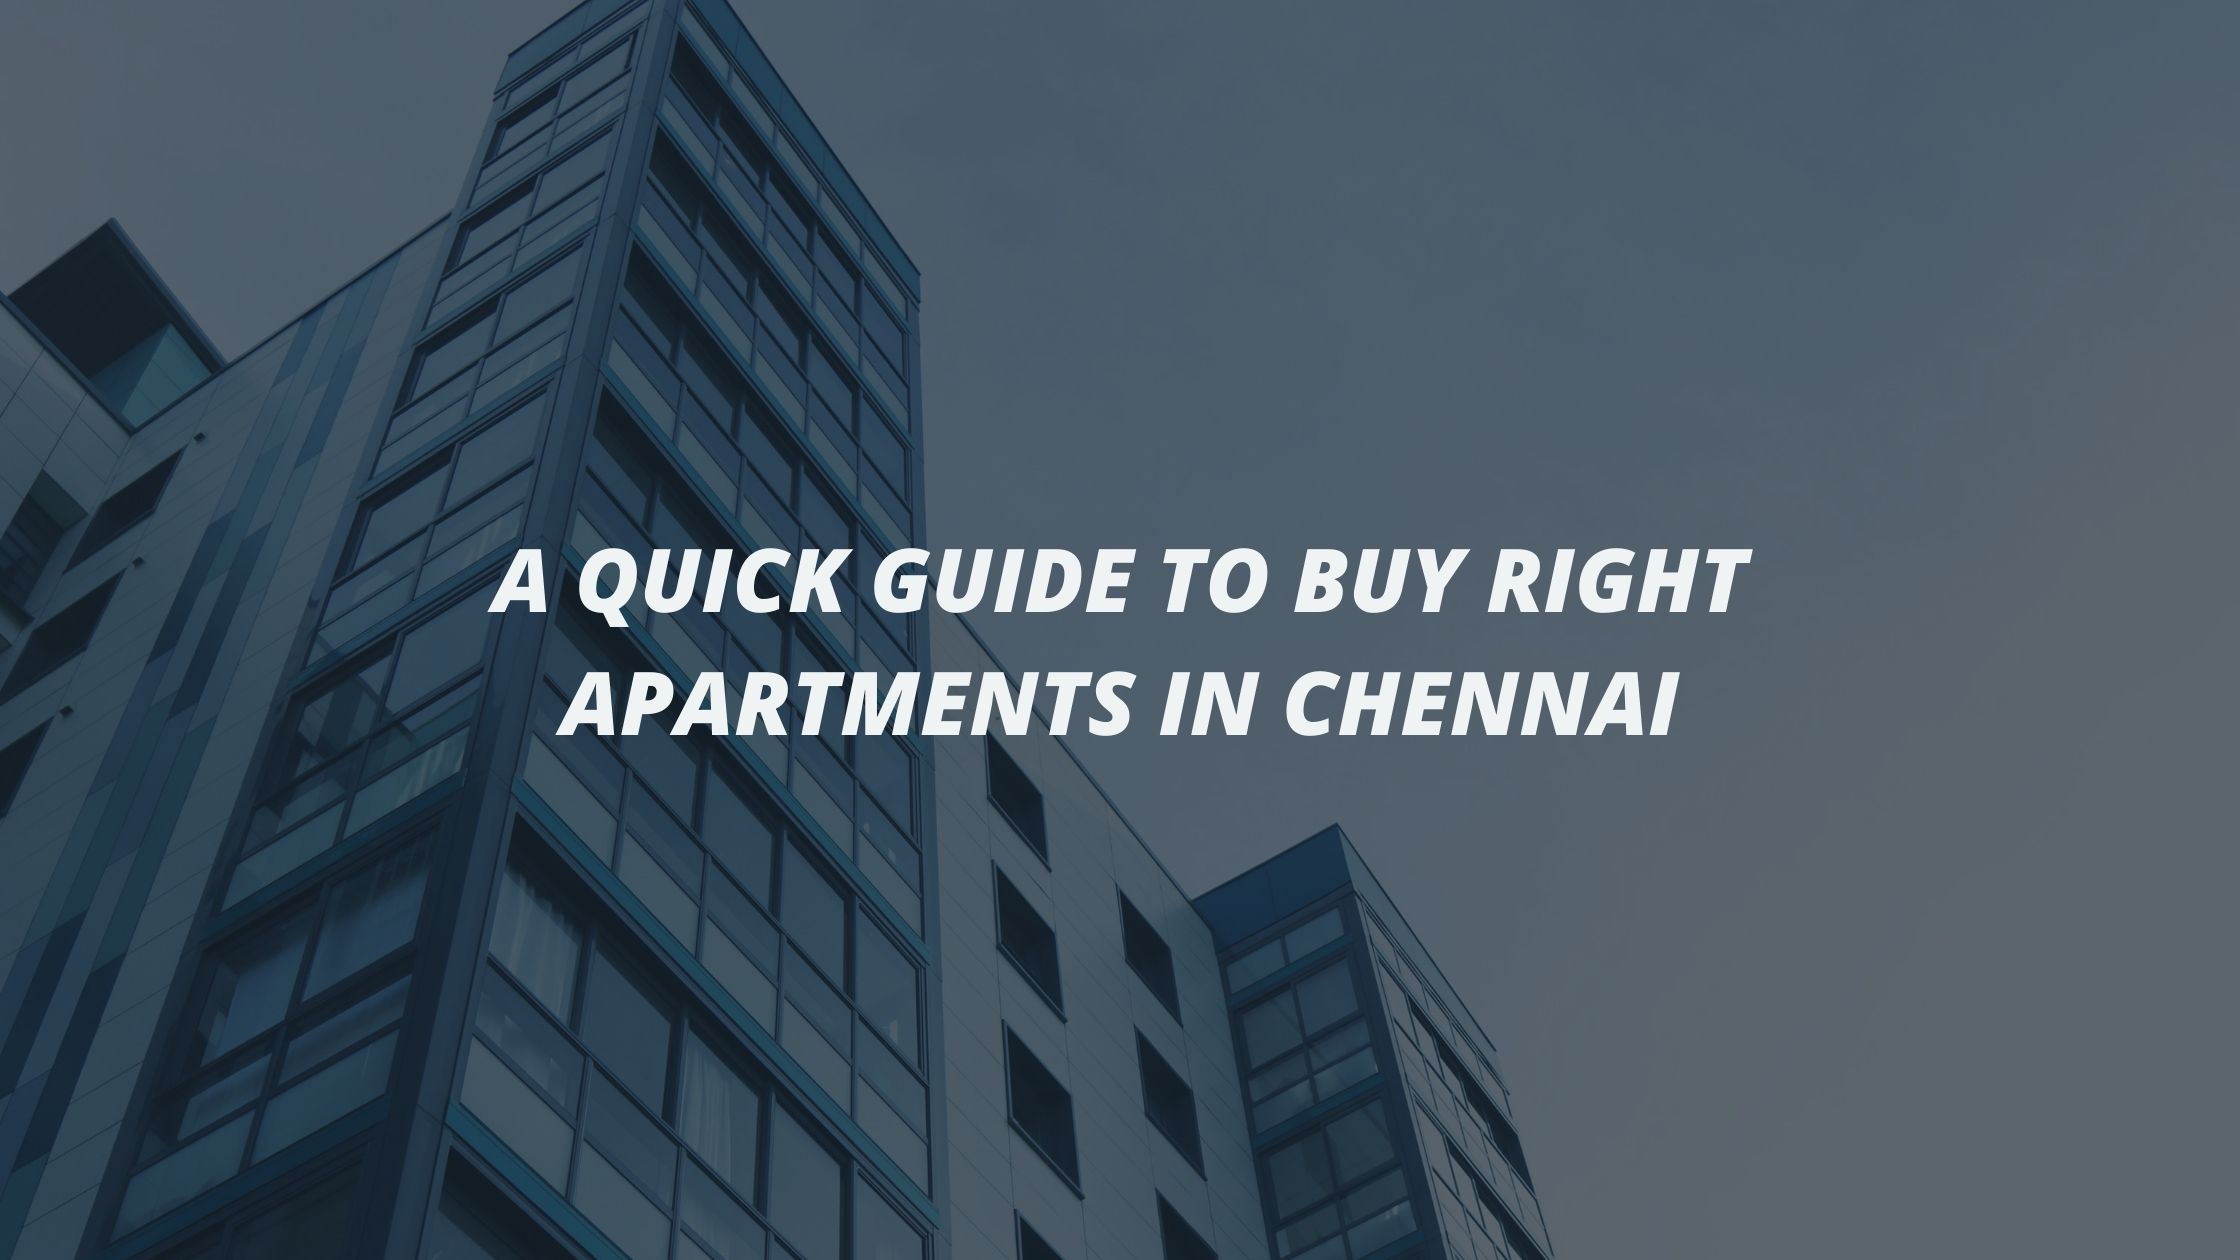 Quick Guide to Buy Right Apartments in Chennai